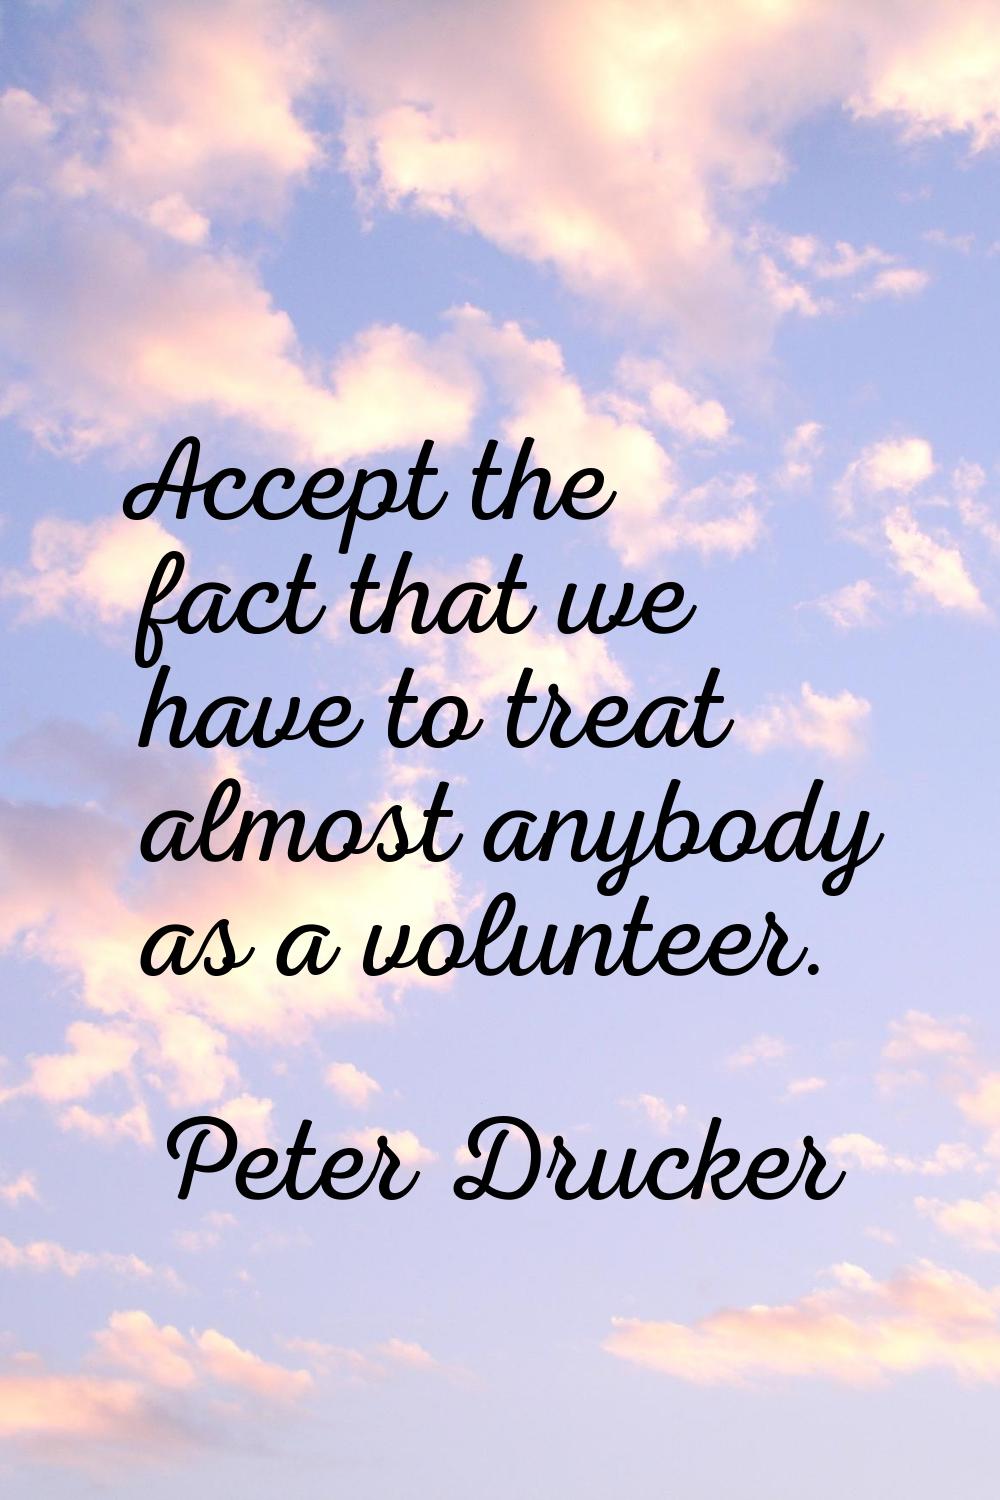 Accept the fact that we have to treat almost anybody as a volunteer.